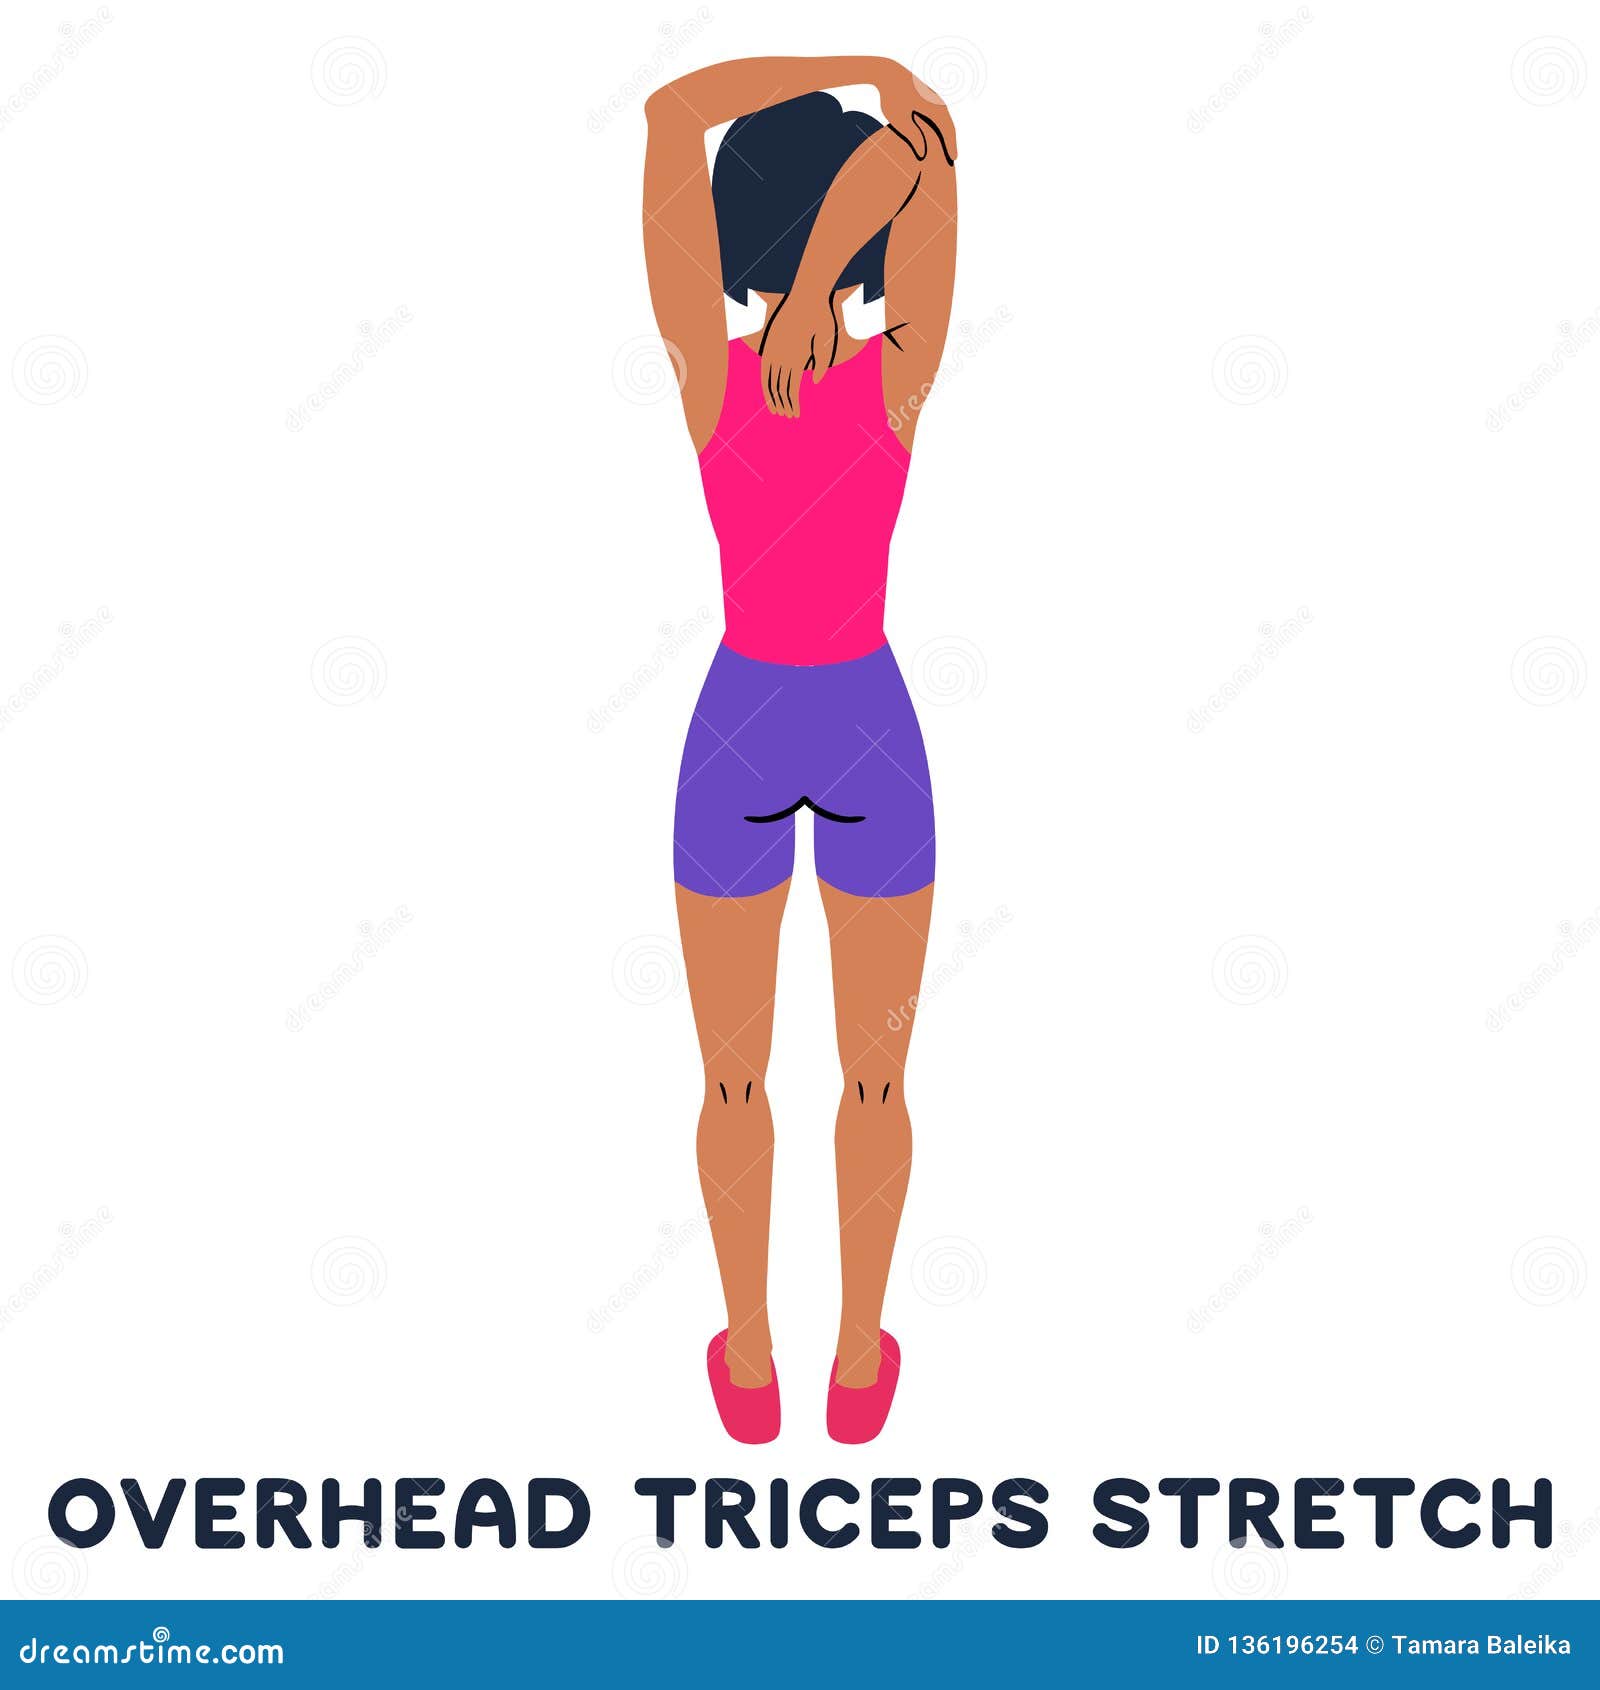 https://thumbs.dreamstime.com/z/overhead-triceps-stretch-sport-exersice-silhouettes-woman-doing-exercise-workout-training-overhead-triceps-stretch-sport-136196254.jpg